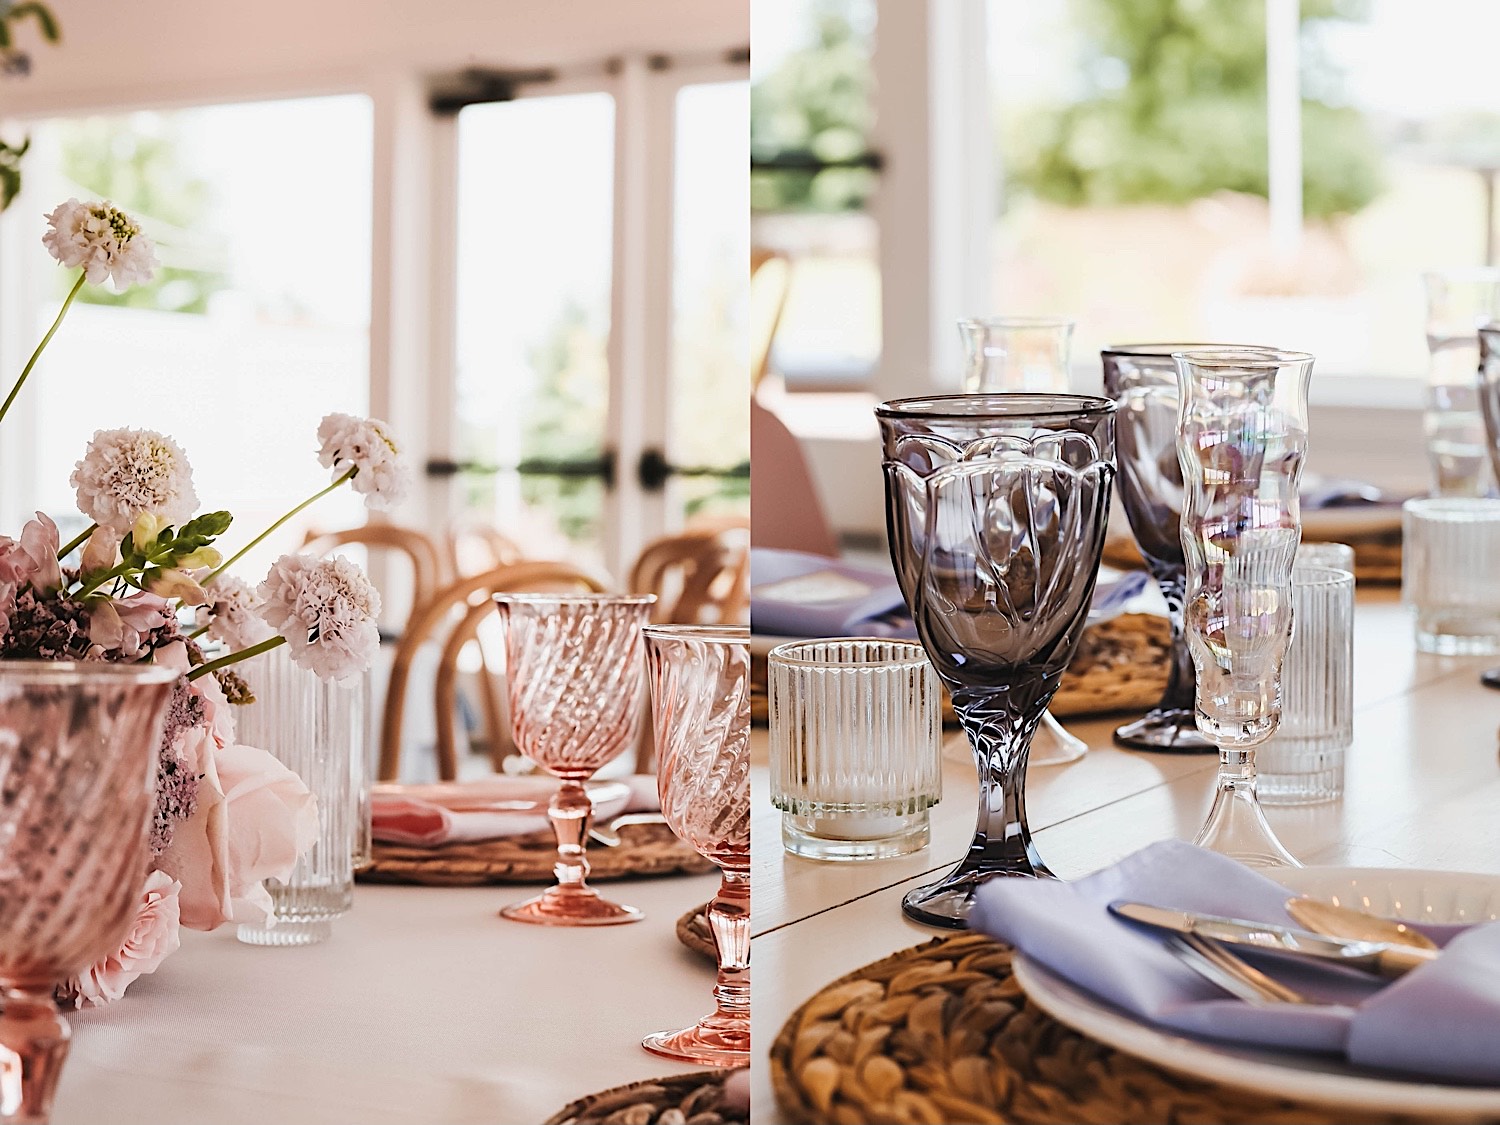 2 photos side by side of glass tableware on a table for a wedding, the glasses in the left photo are pink and in the right photo they are purple